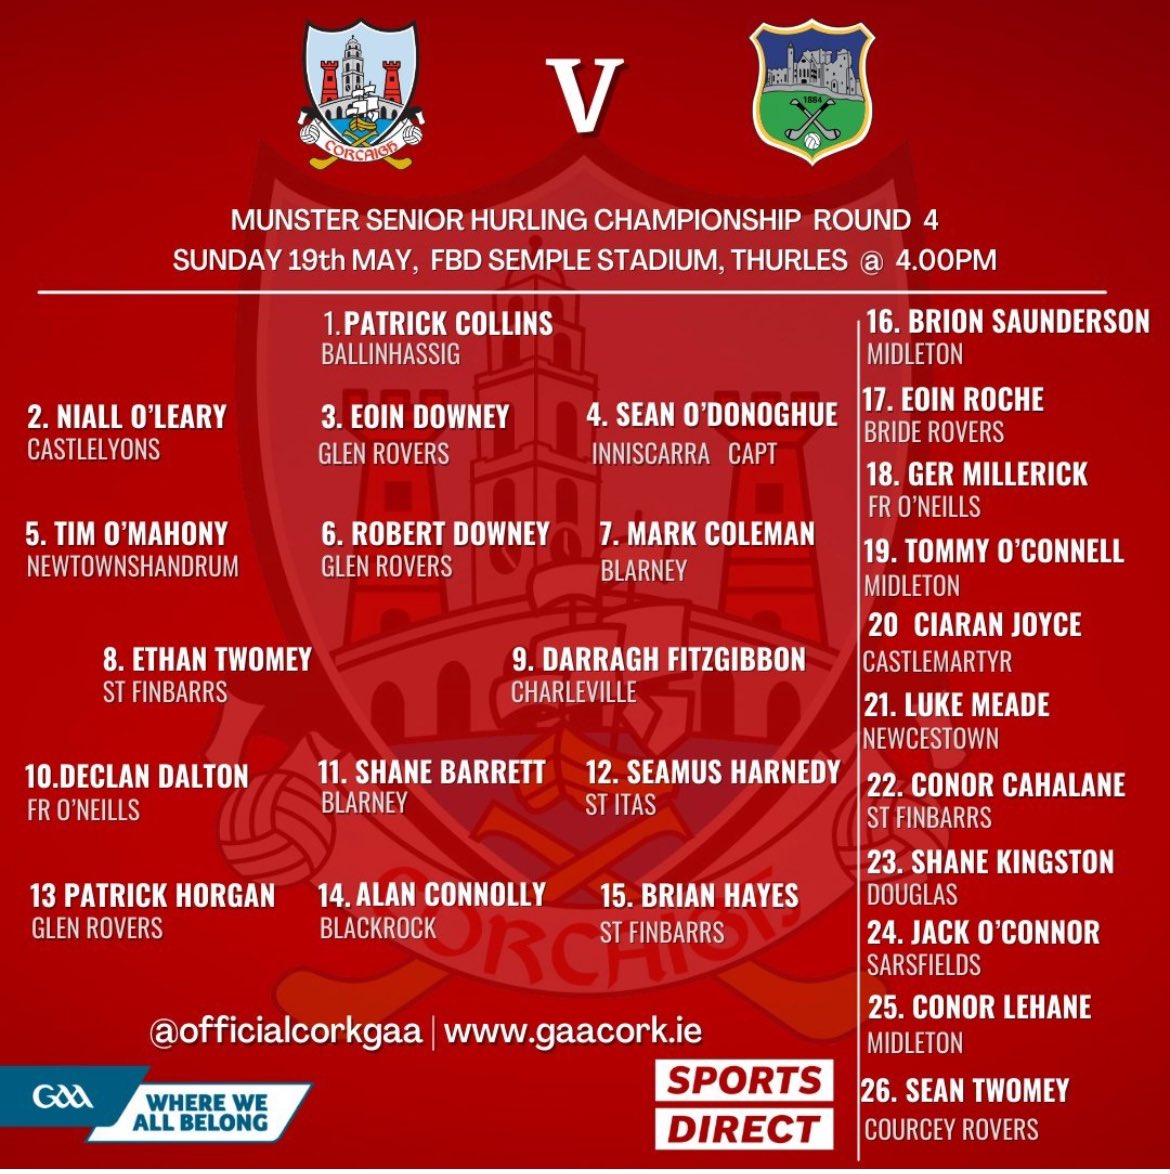 Another big one for the Rebels on Sunday! Good luck to Alan, Wayne and all involved for the trip to Tipp 🔴⚪️